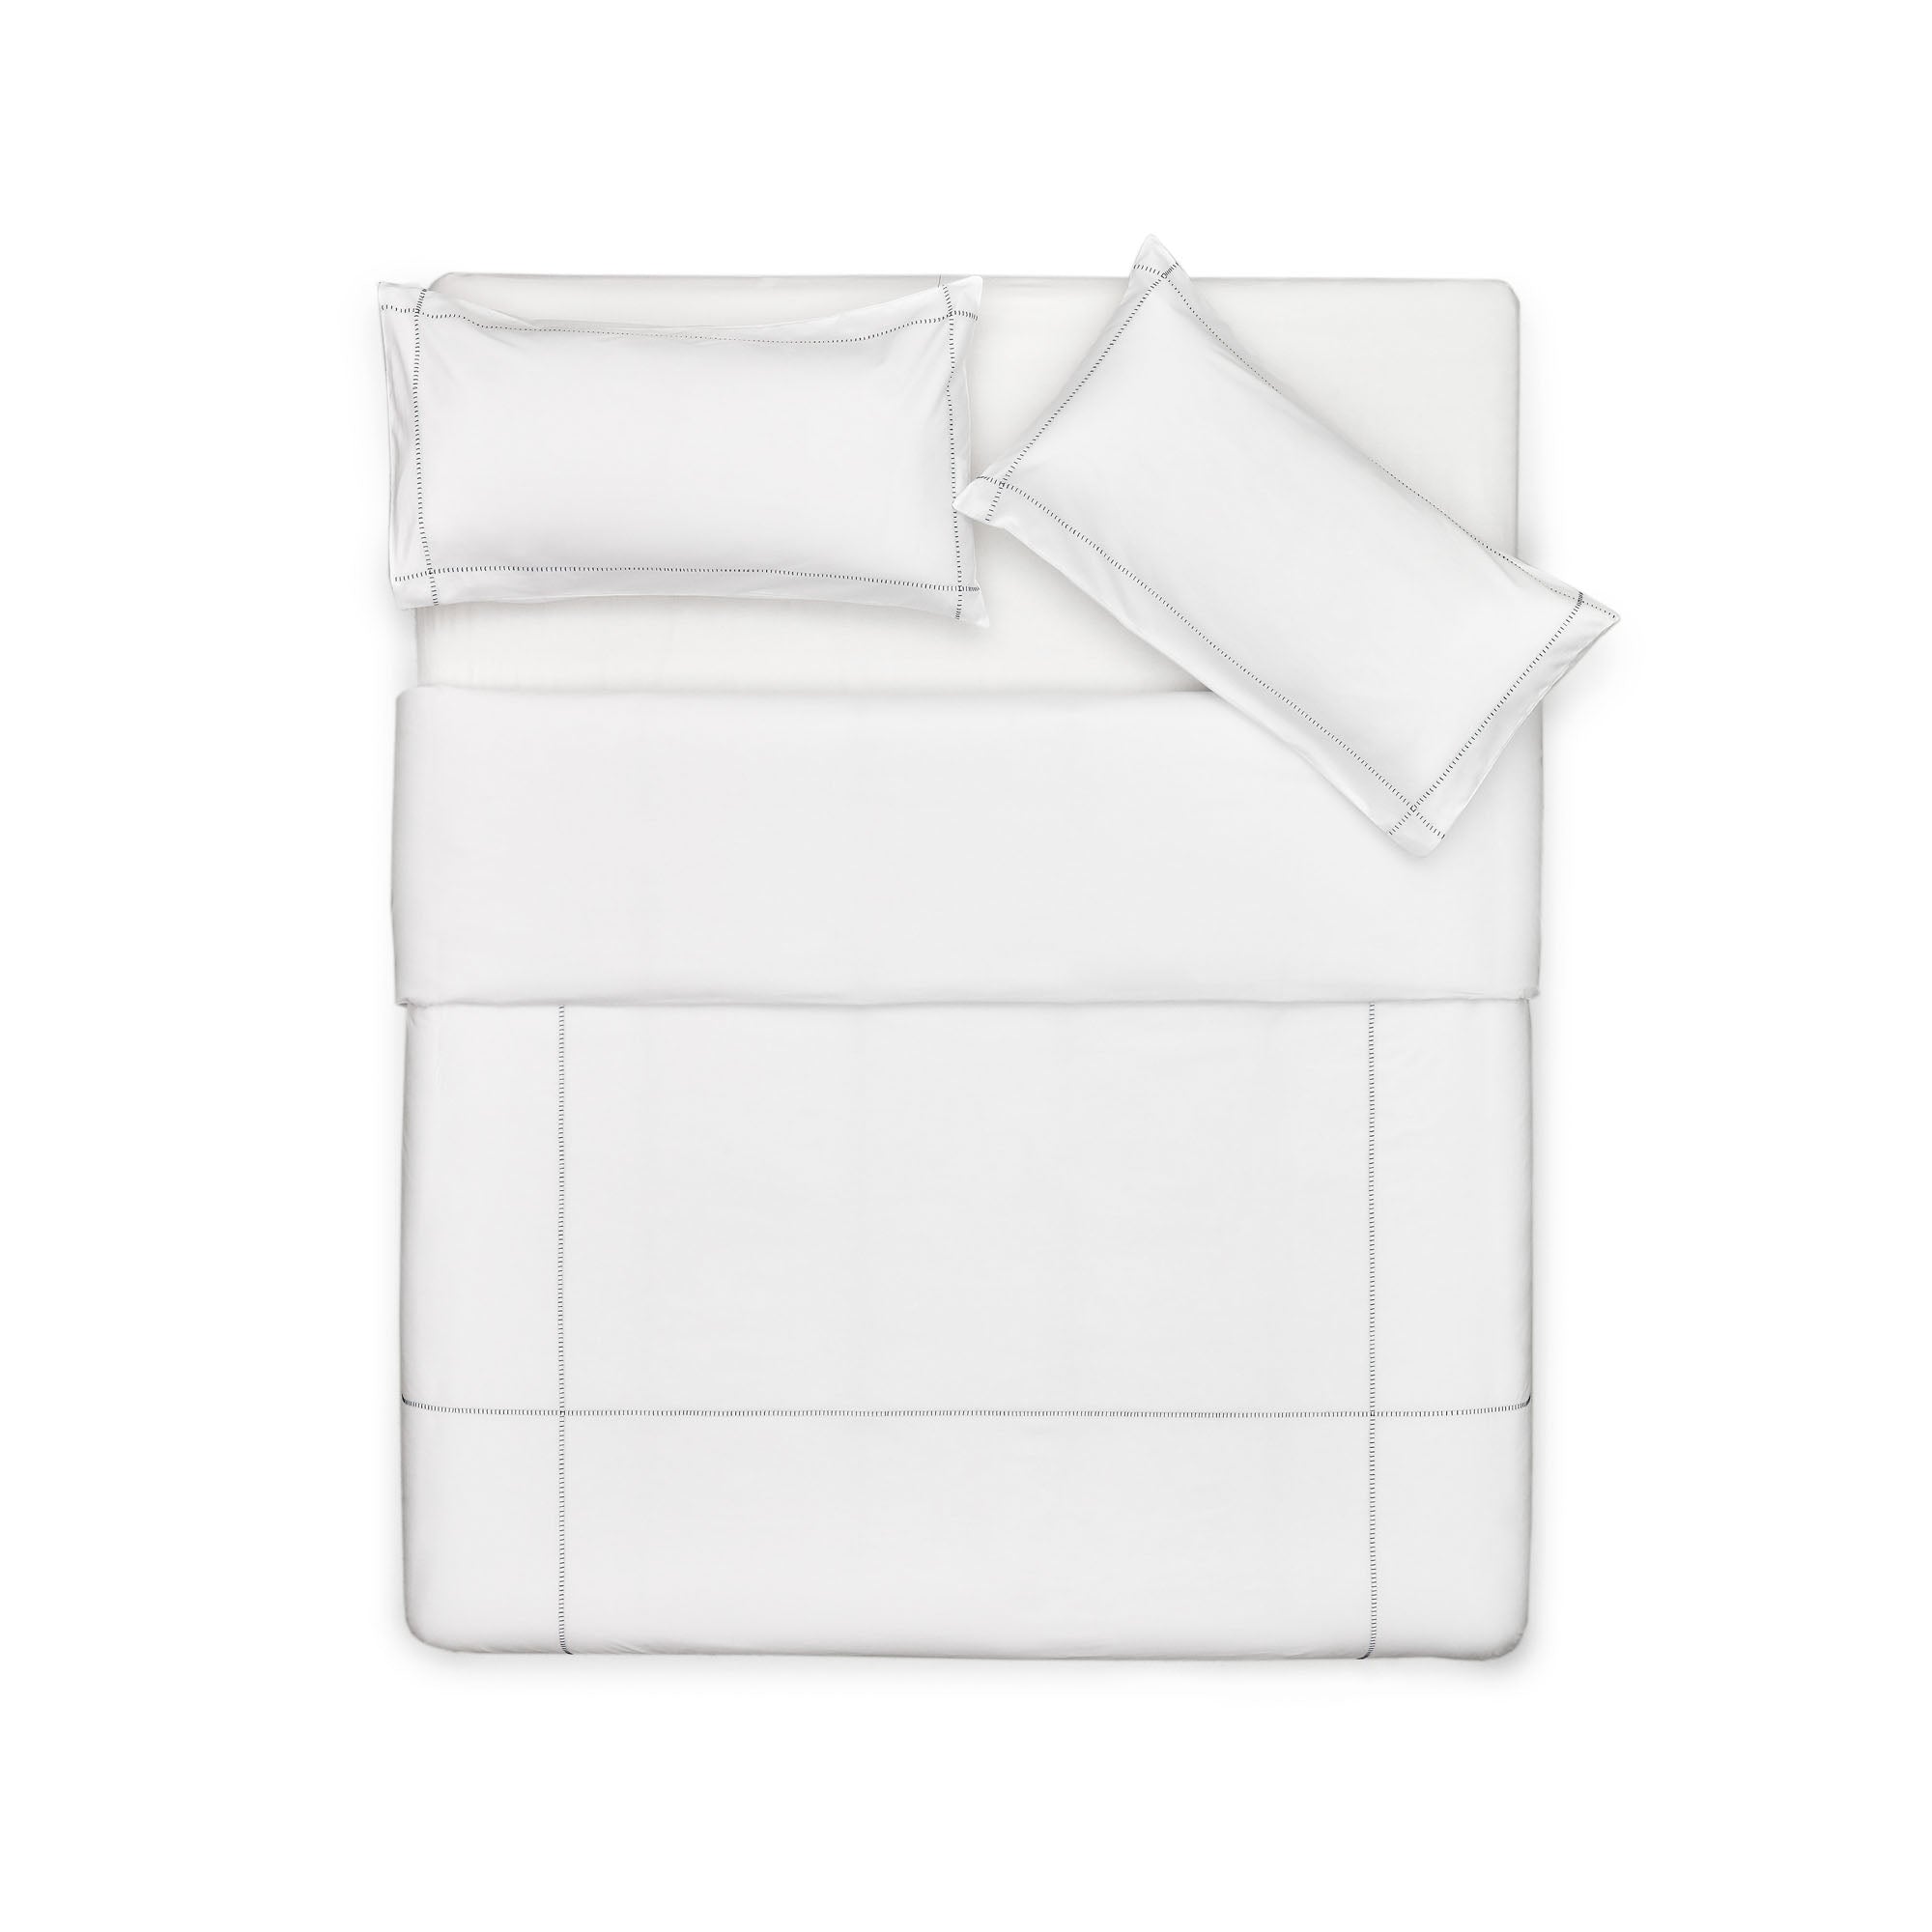 Elvia 100% cotton percale duvet cover and pillow case set, 180 thread count in white, 135 x 200cm